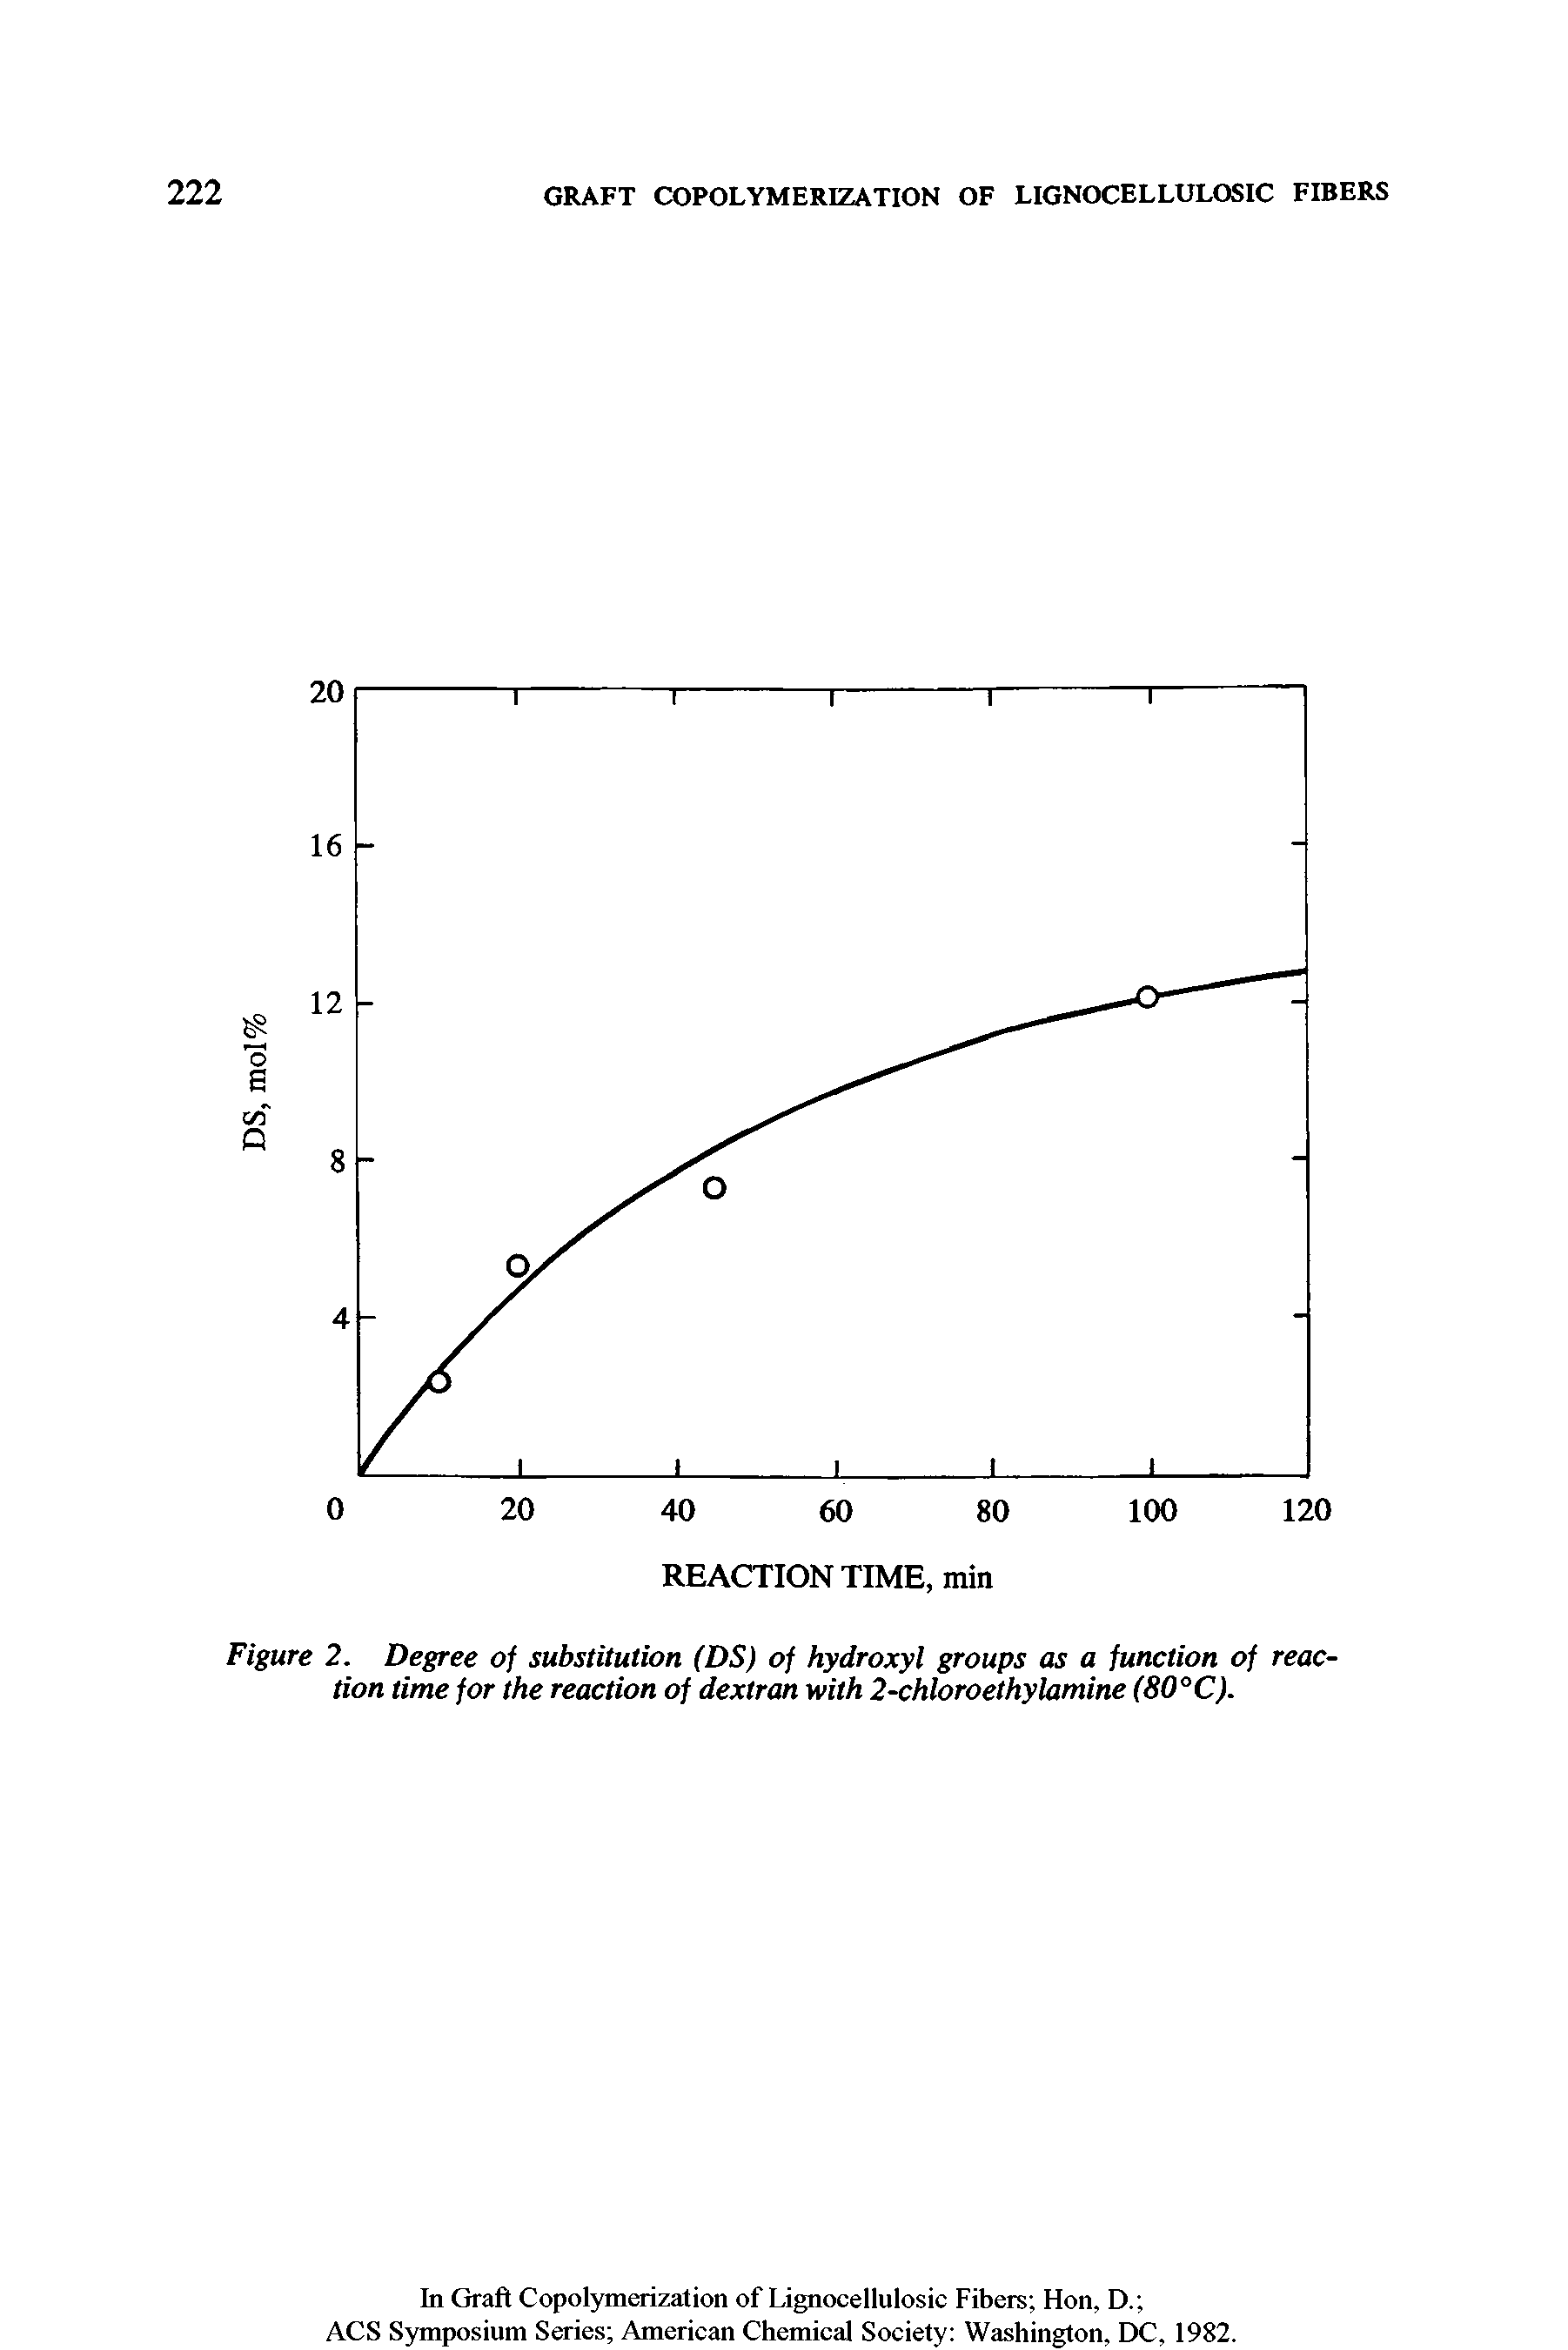 Figure 2. Degree of substitution (DS) of hydroxyl groups as a function of reaction time for the reaction of dextran with 2-chloroethylamine (80°C).